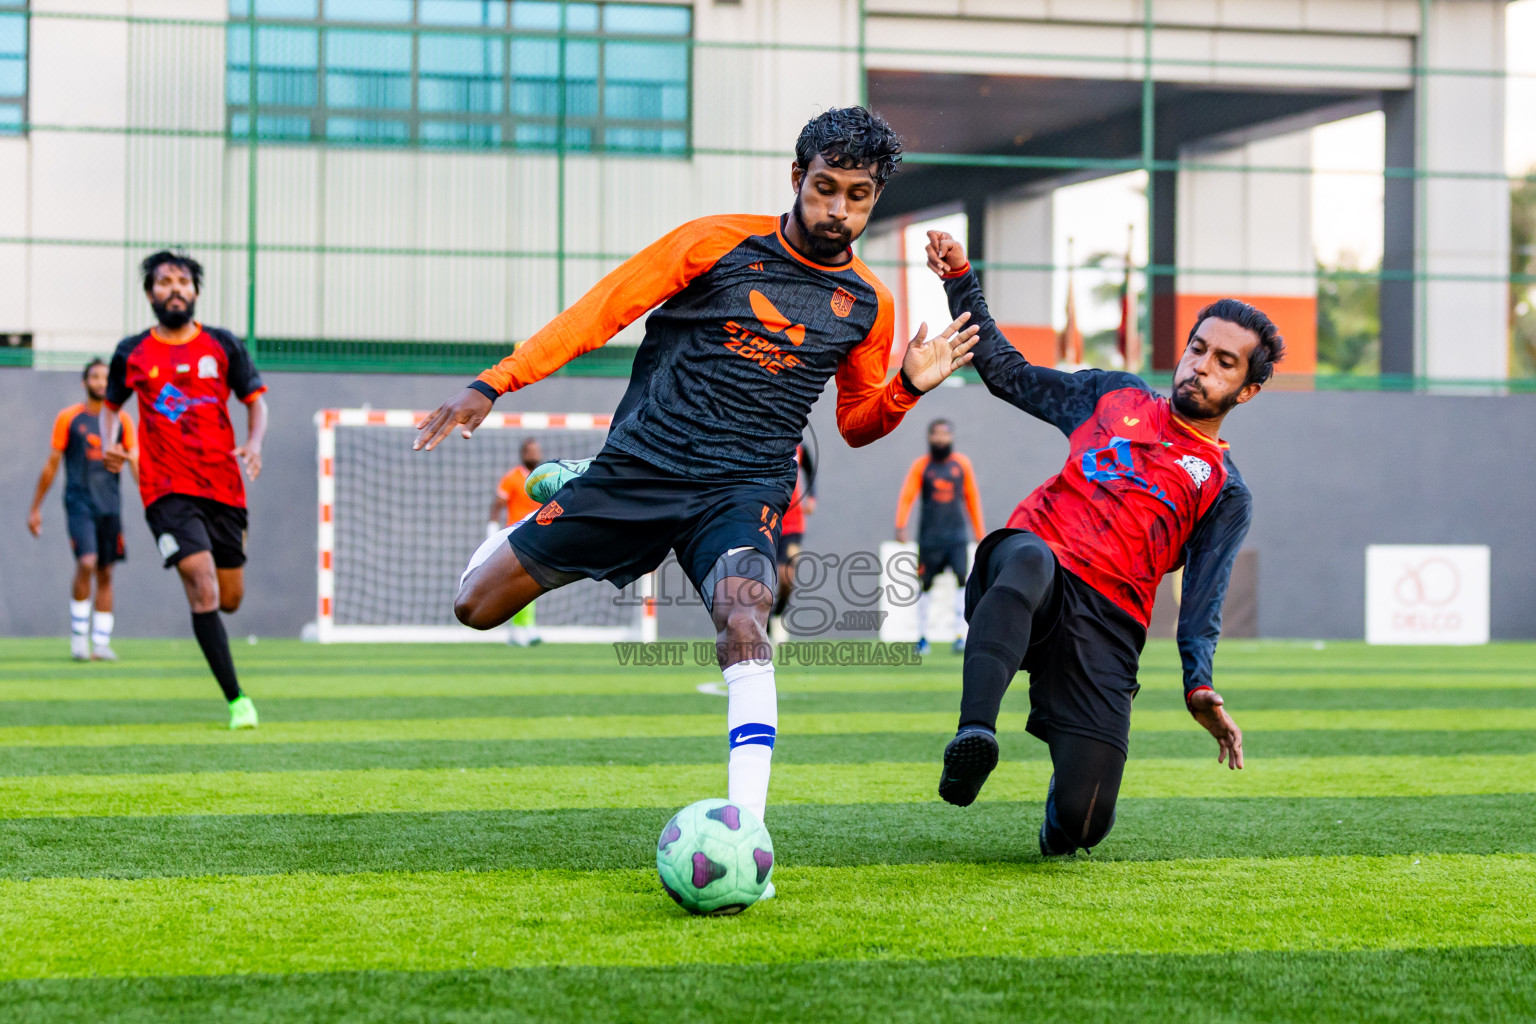 BG Sports Club vs FC Calms in Day 11 of BG Futsal Challenge 2024 was held on Friday, 22nd March 2024, in Male', Maldives Photos: Nausham Waheed / images.mv